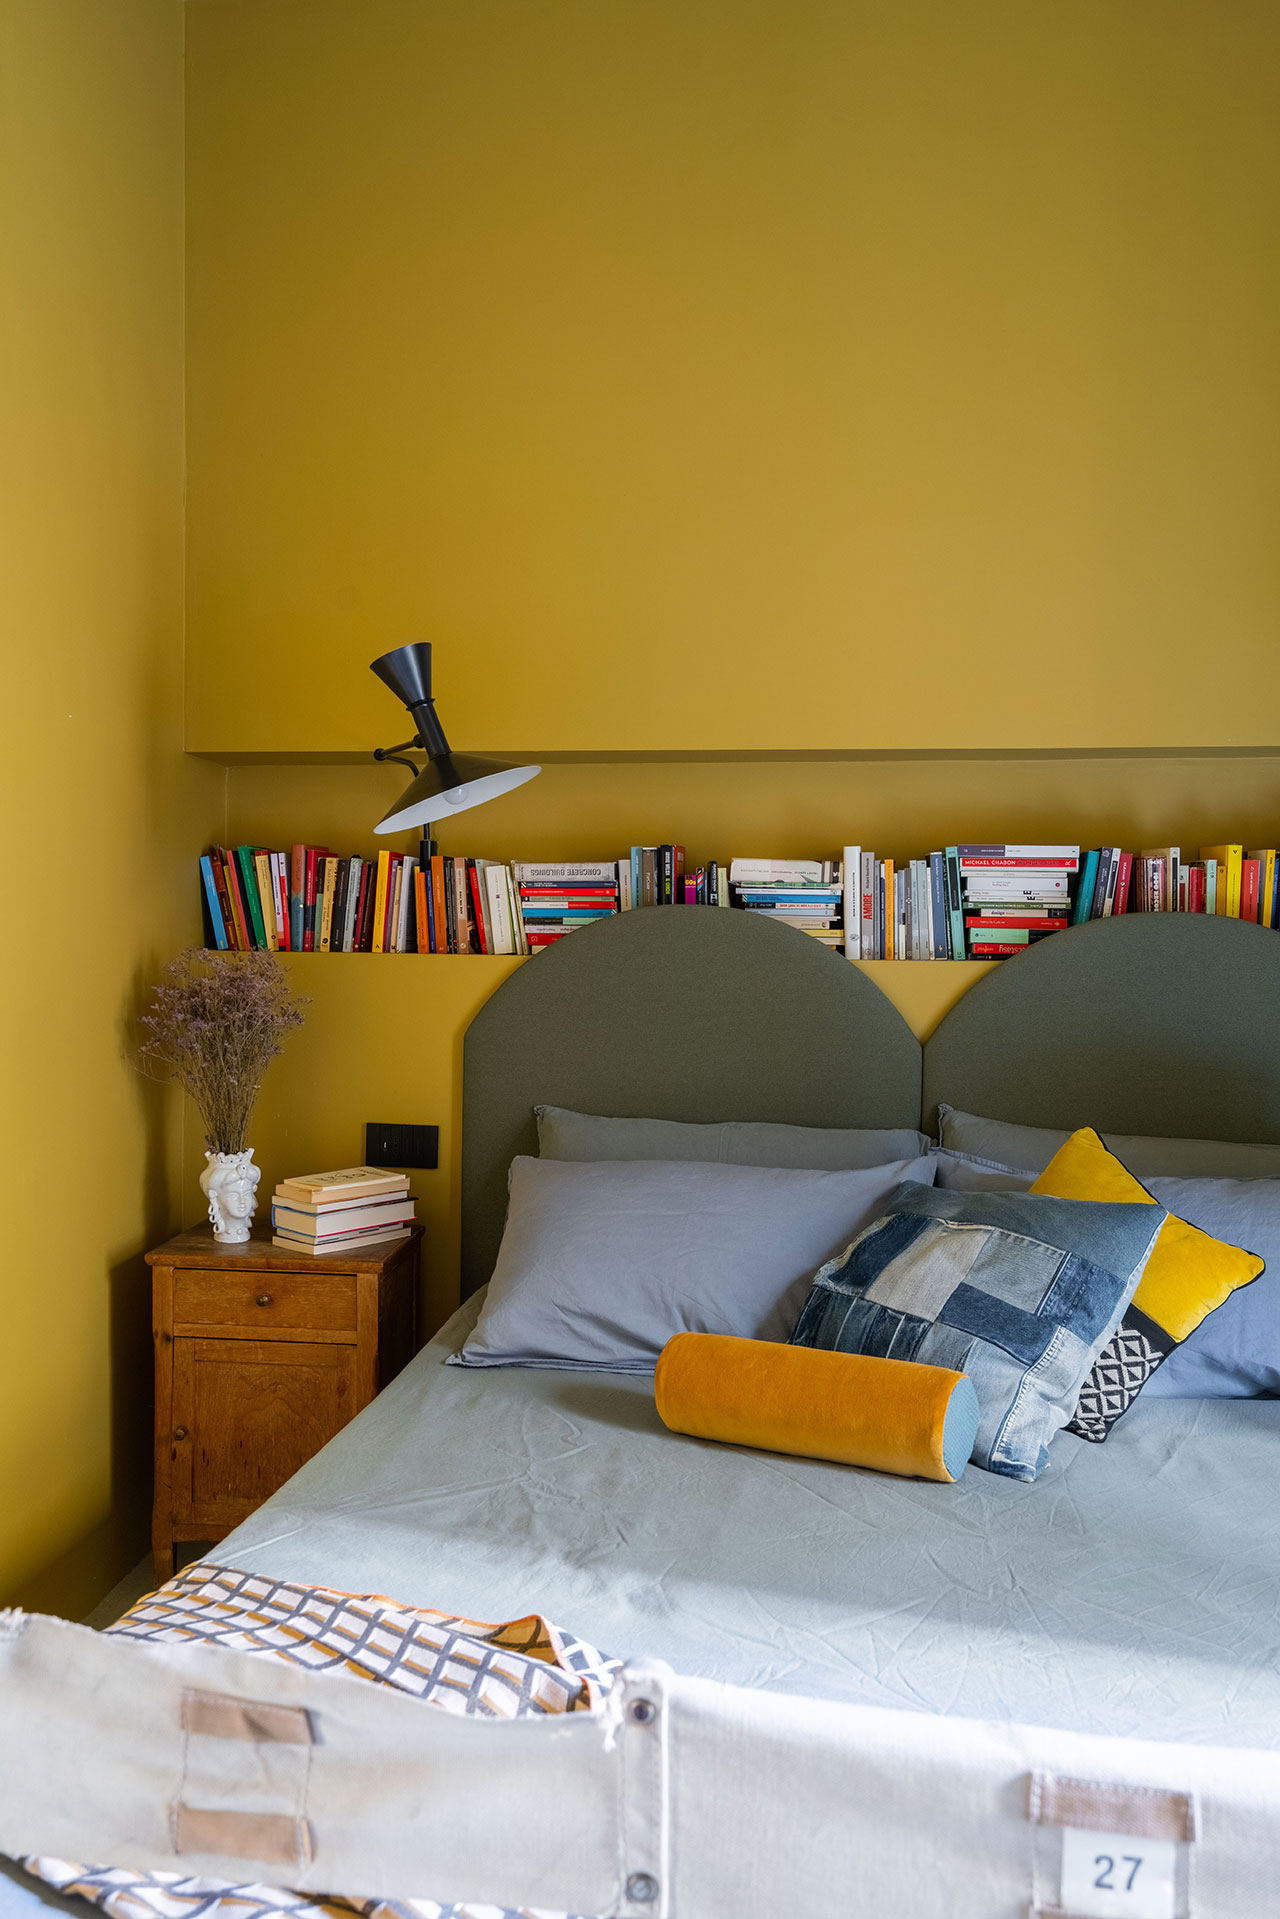 Wall light: Lampe de Marseille by Le Corbusier for Nemo; Bedside tables and set of folding chairs: vintage; Headboard: custom designed by STUDIOTAMAT and covered with Vescom fabrics.
Photography © Seven H. Zhang.